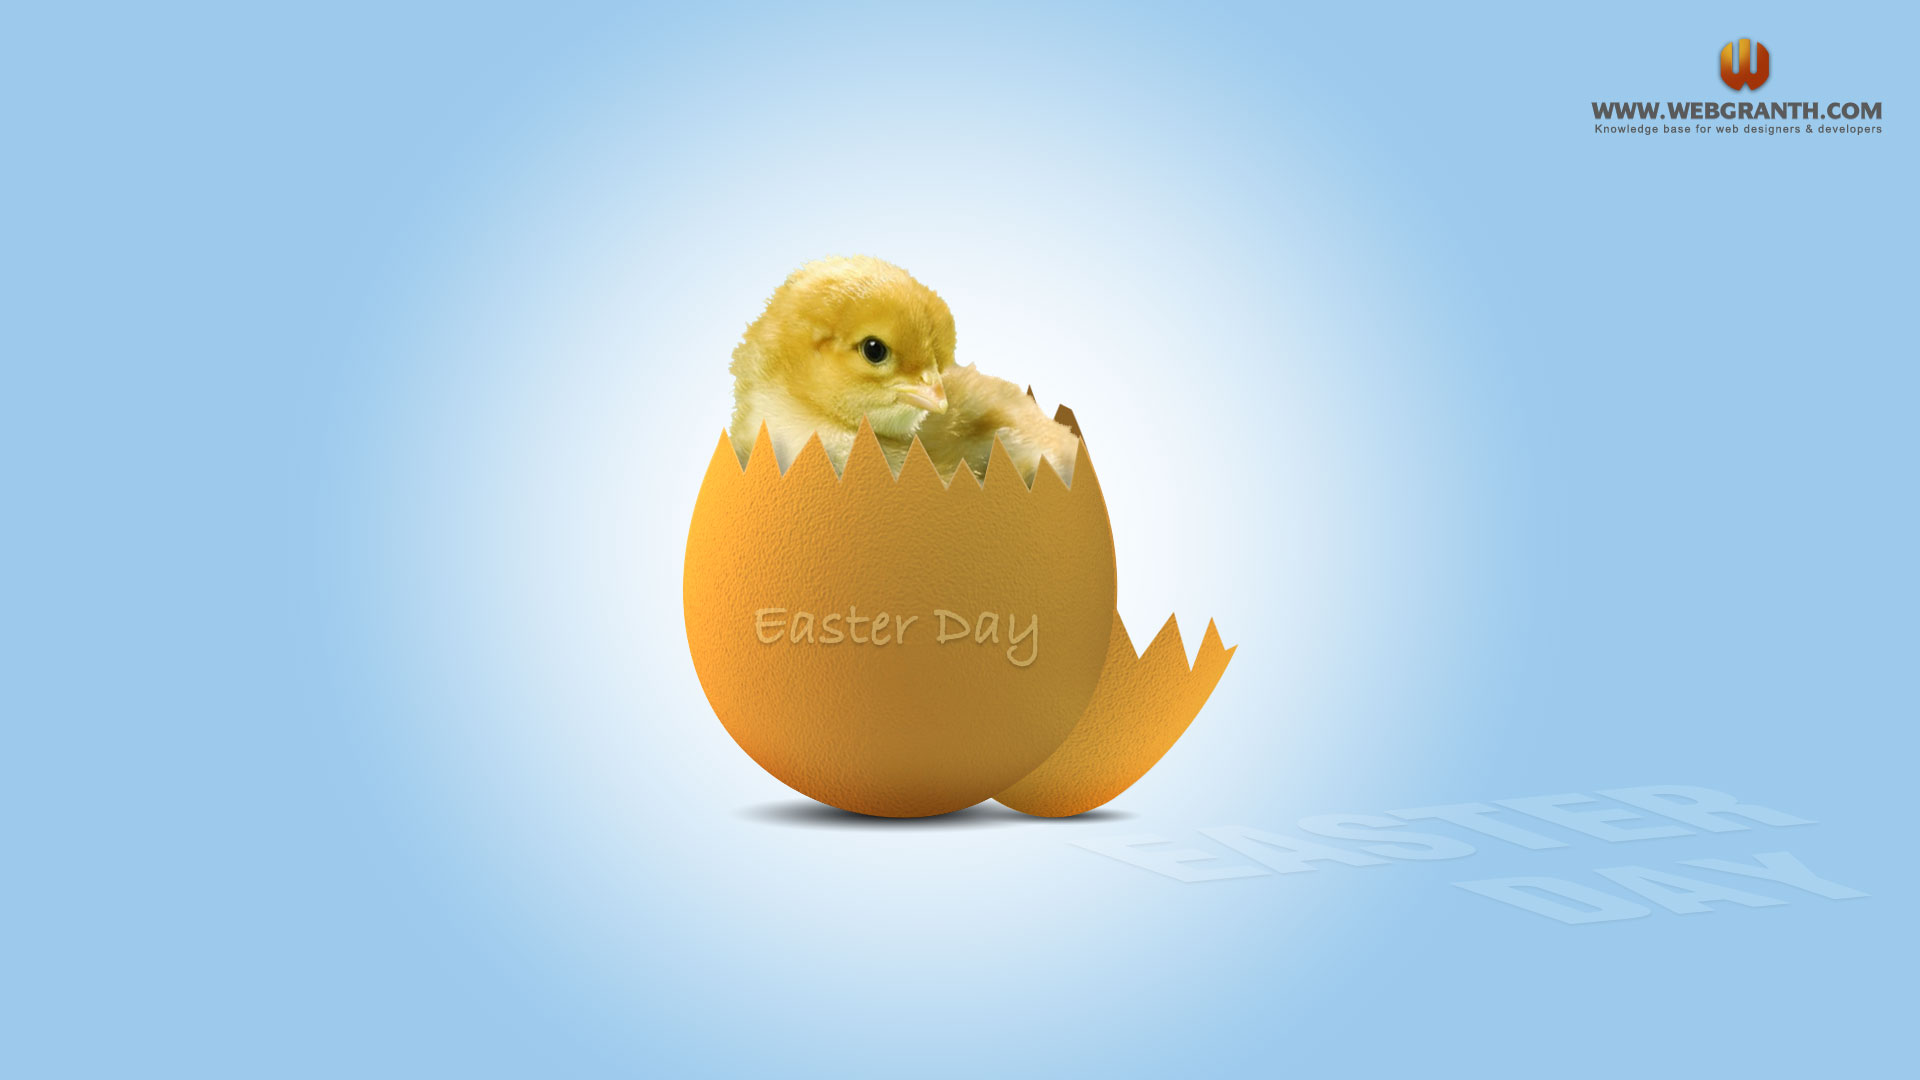 Easter Chick Wallpaper On